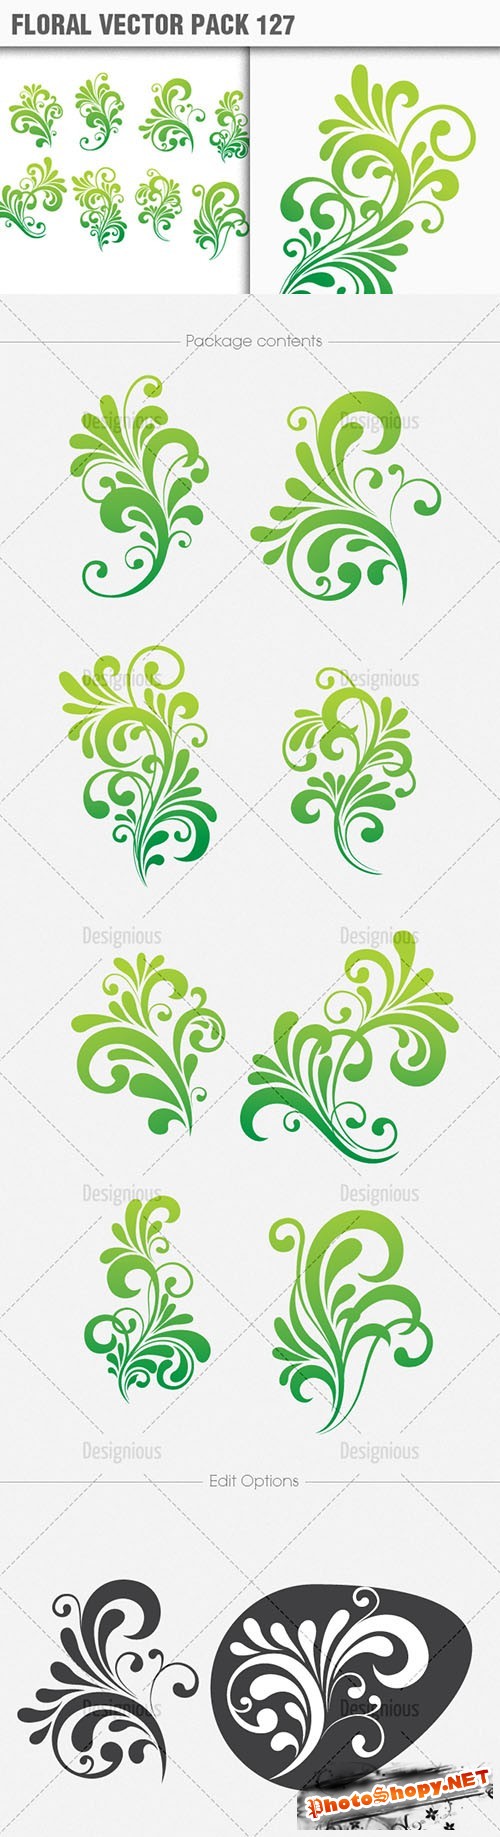 Floral Vector Pack 127